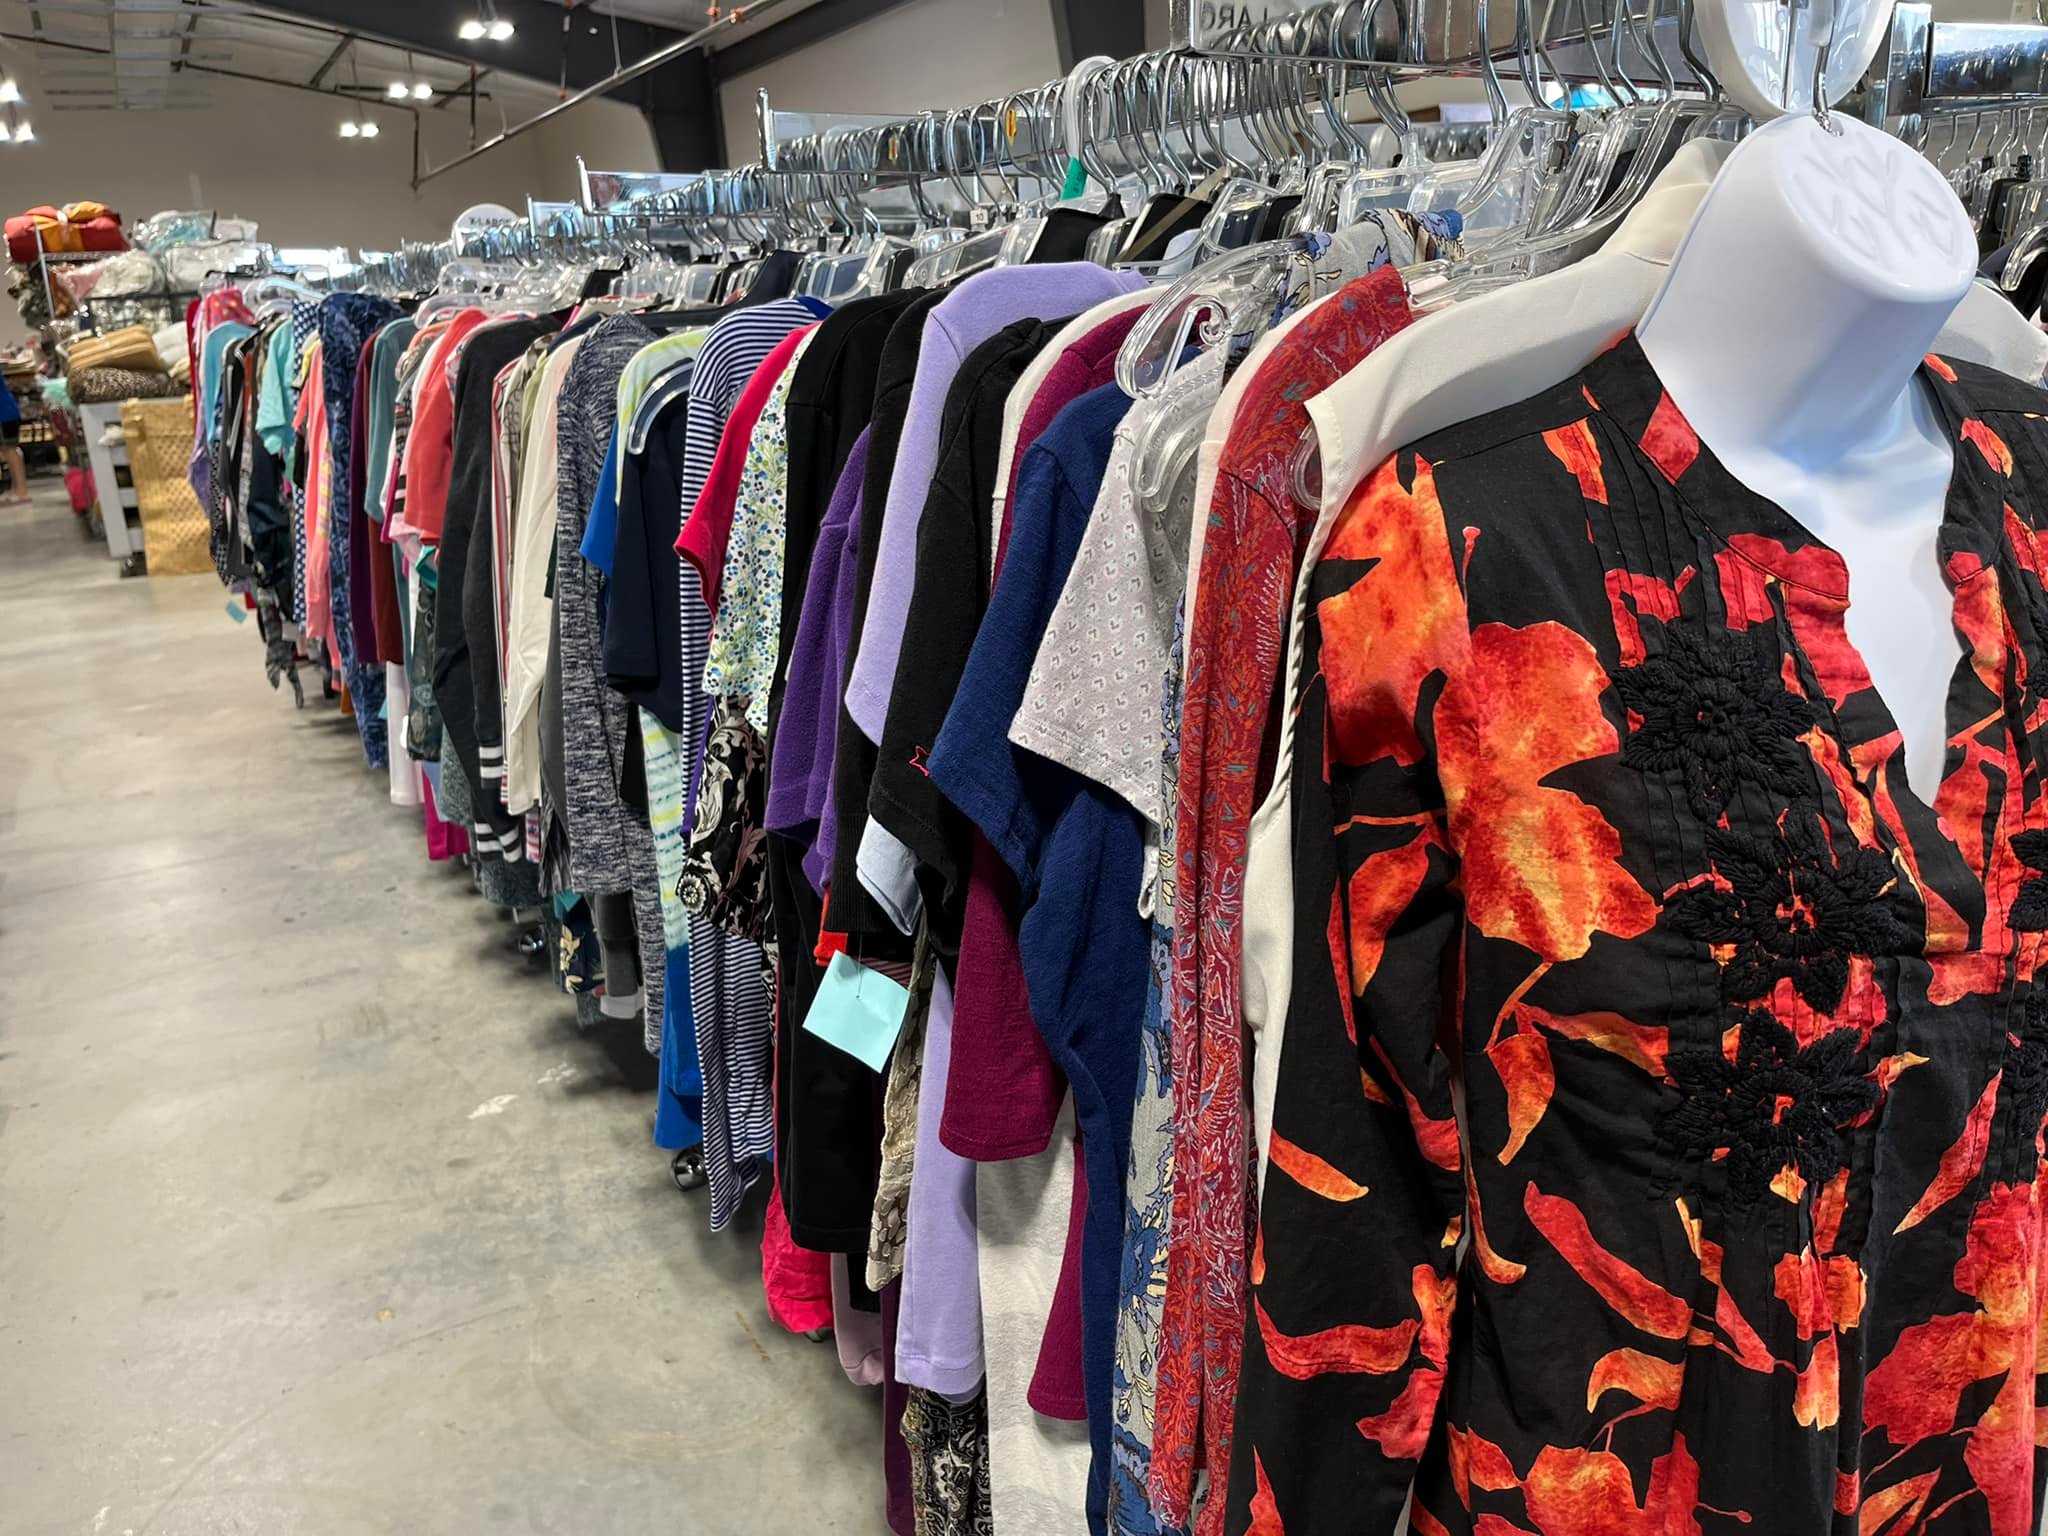 Do Good by Doing Good: Enjoy Half Off All Clothing at Angels' Attic This Week